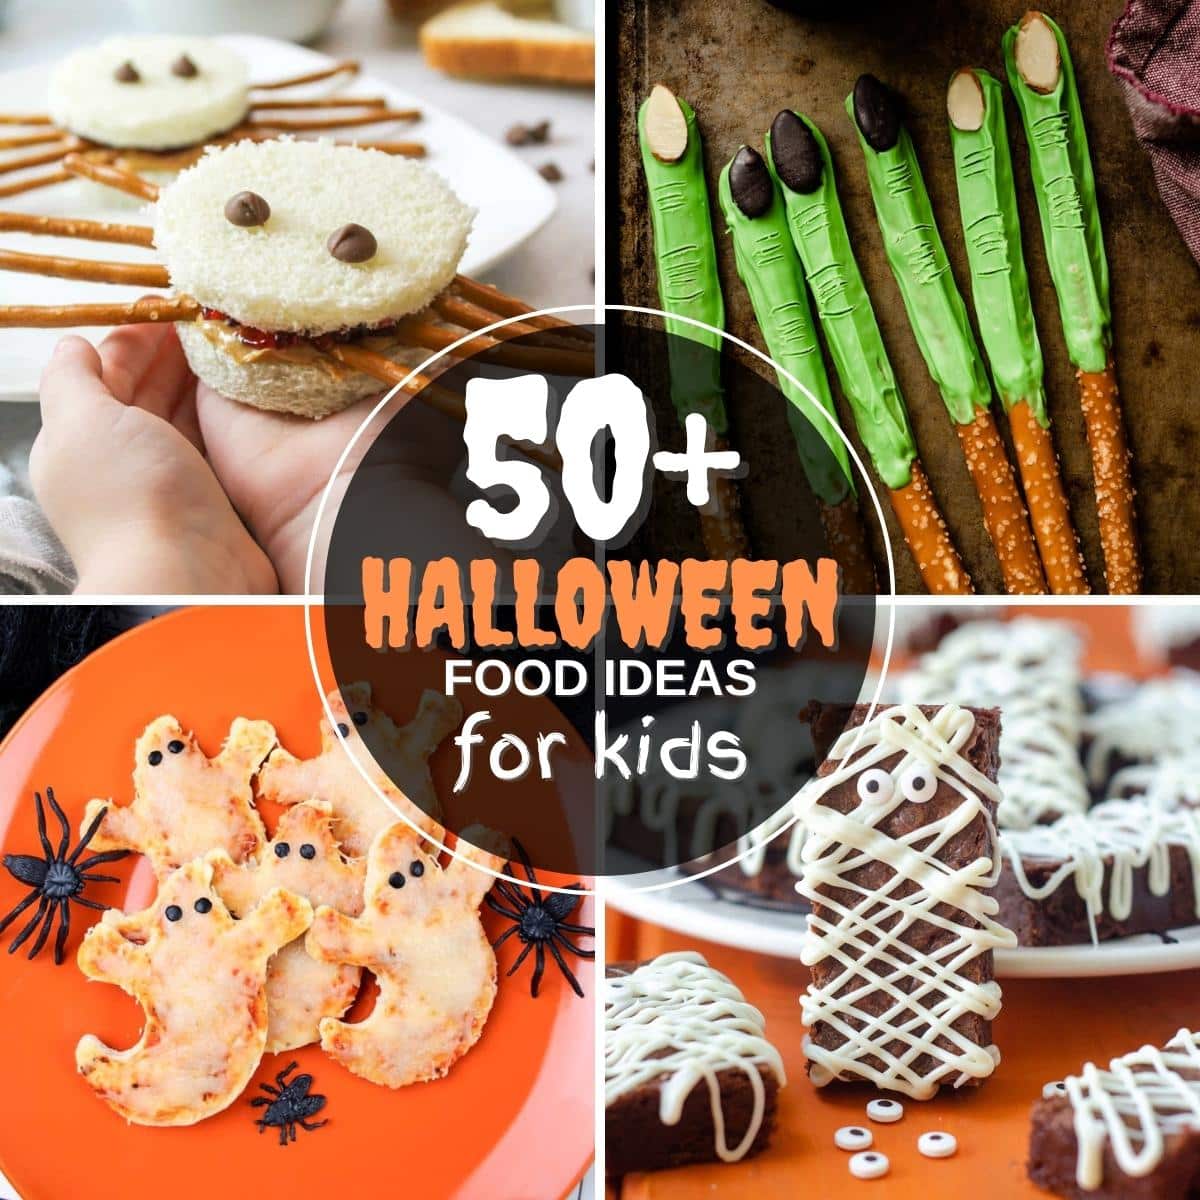 All of the fun Halloween food ideas you need for kids in one spot-- from appetizers and non-alcoholic drinks to main dishes and desserts, grab all the easy recipes to create one spectacular Halloween bash! via @frshaprilflours